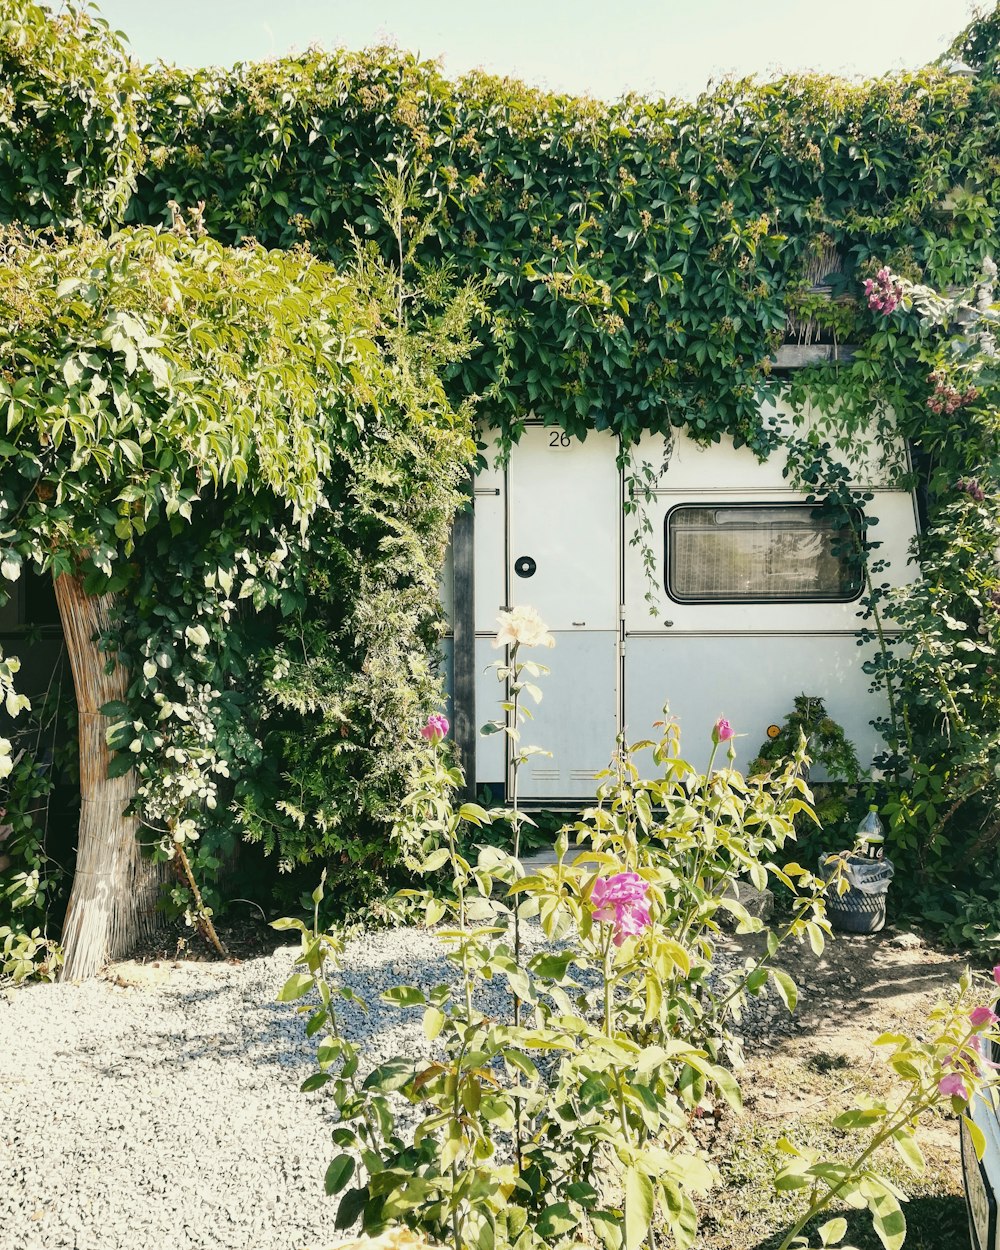 white trailer truck surrounded by green plants